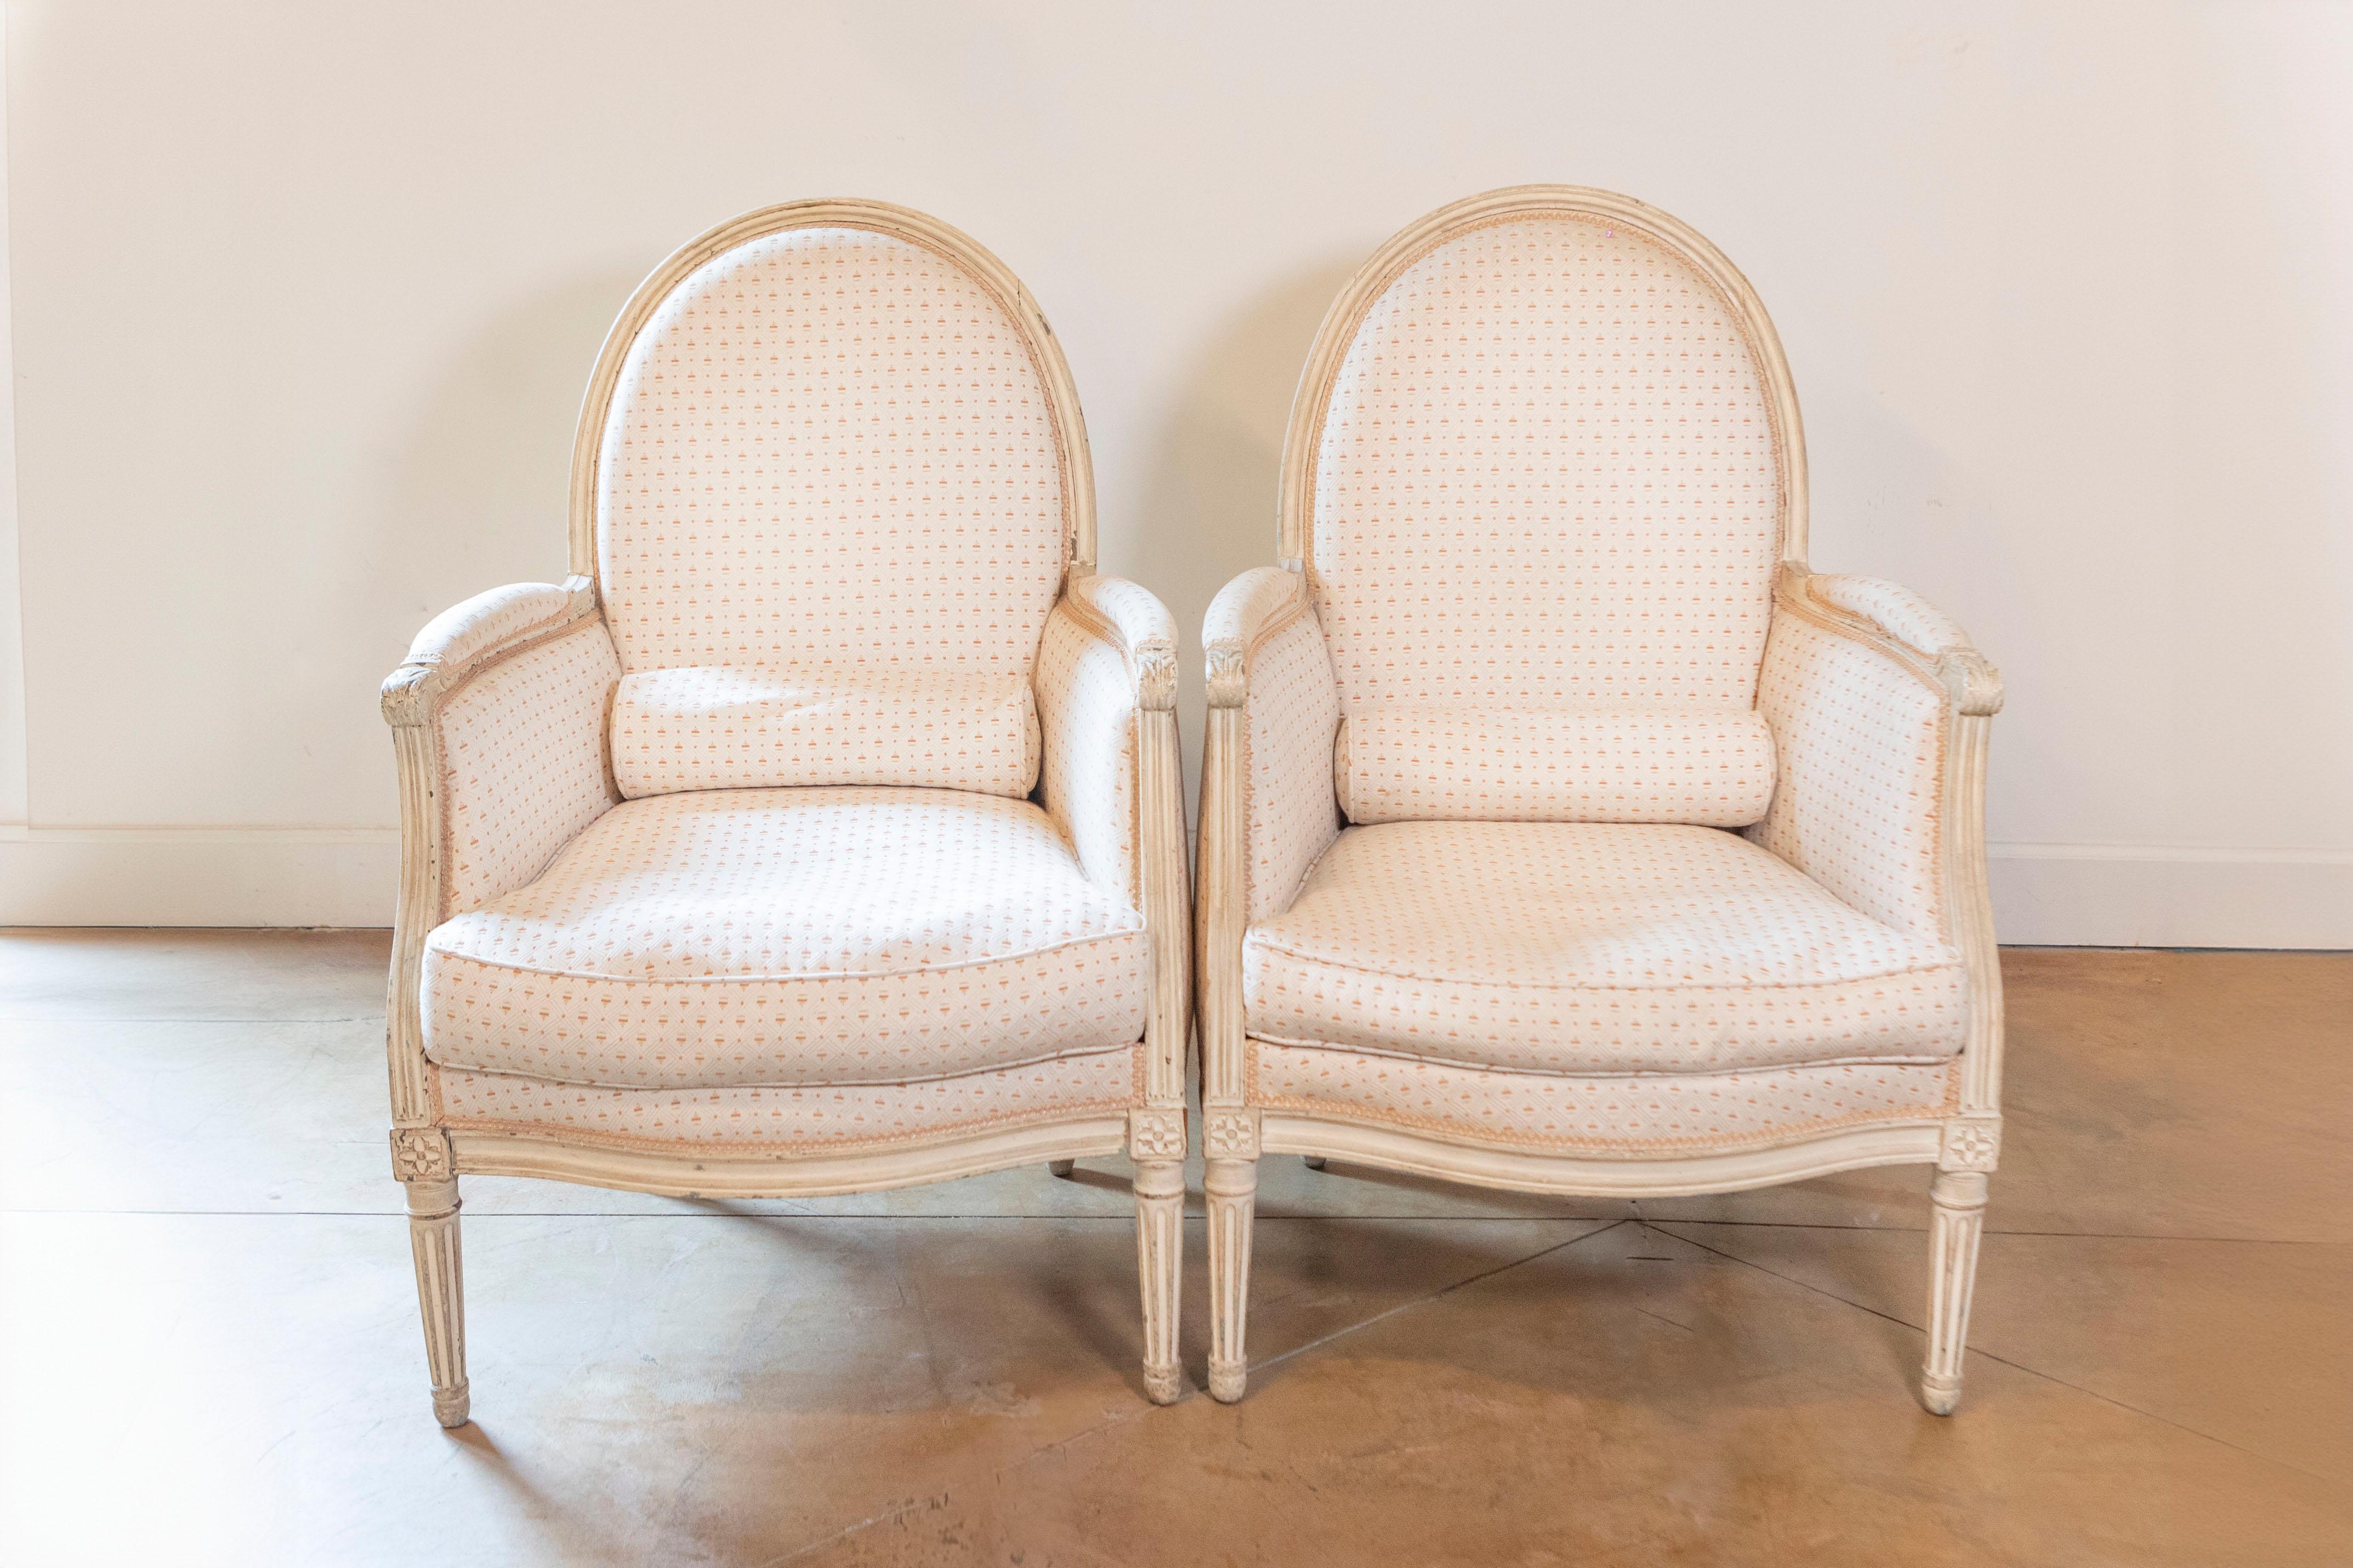 A pair of French Louis XVI style painted wood bergères chairs from the late 19th century, with oval shaped backs, scrolling arms, fluted legs and carved rosettes. Created in France during the last quarter of the 19th century, this pair of bergères